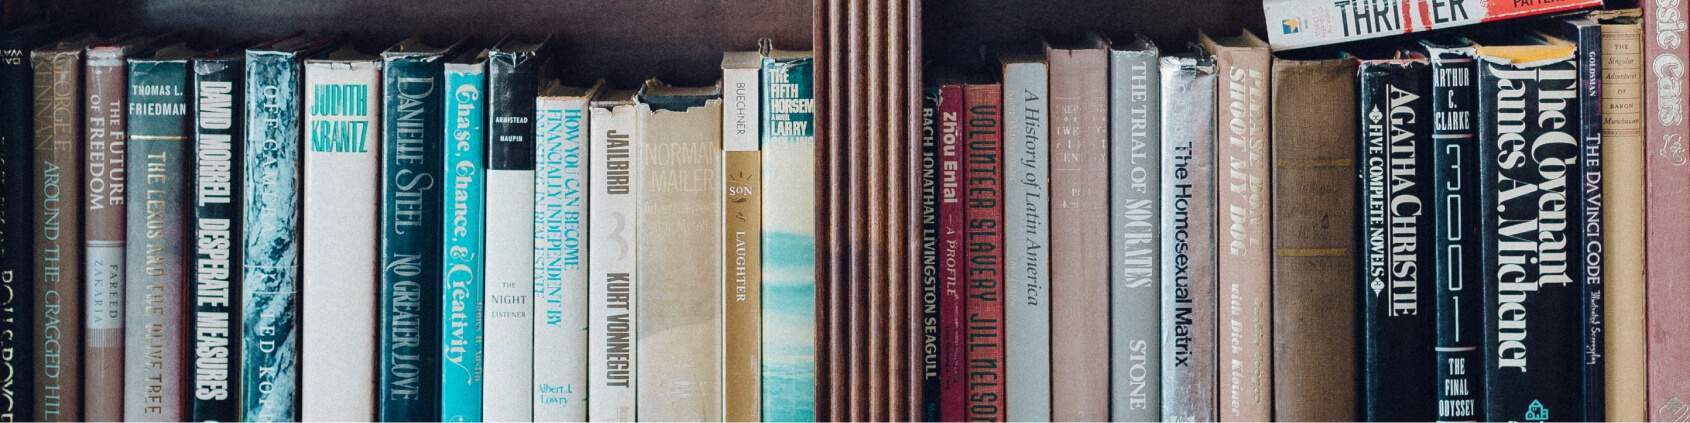 close up of the book spines on a book shelf